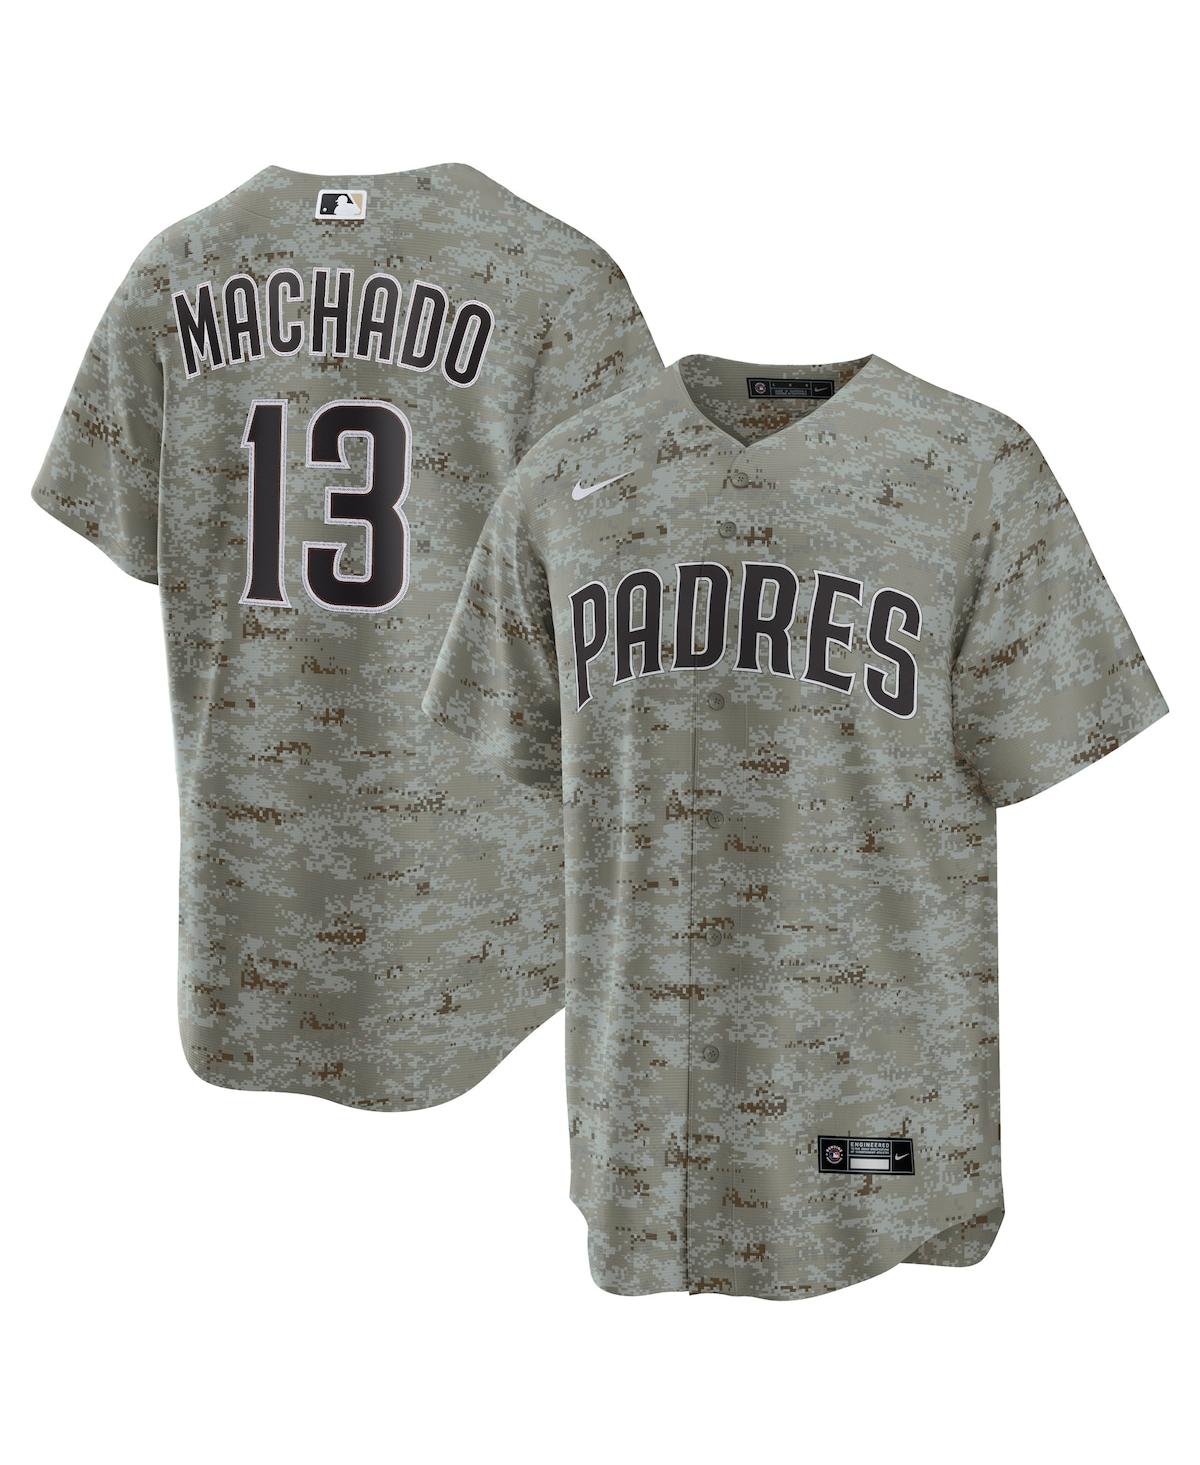 Men's Nike White/Brown San Diego Padres Home 2020 Replica Team Jersey